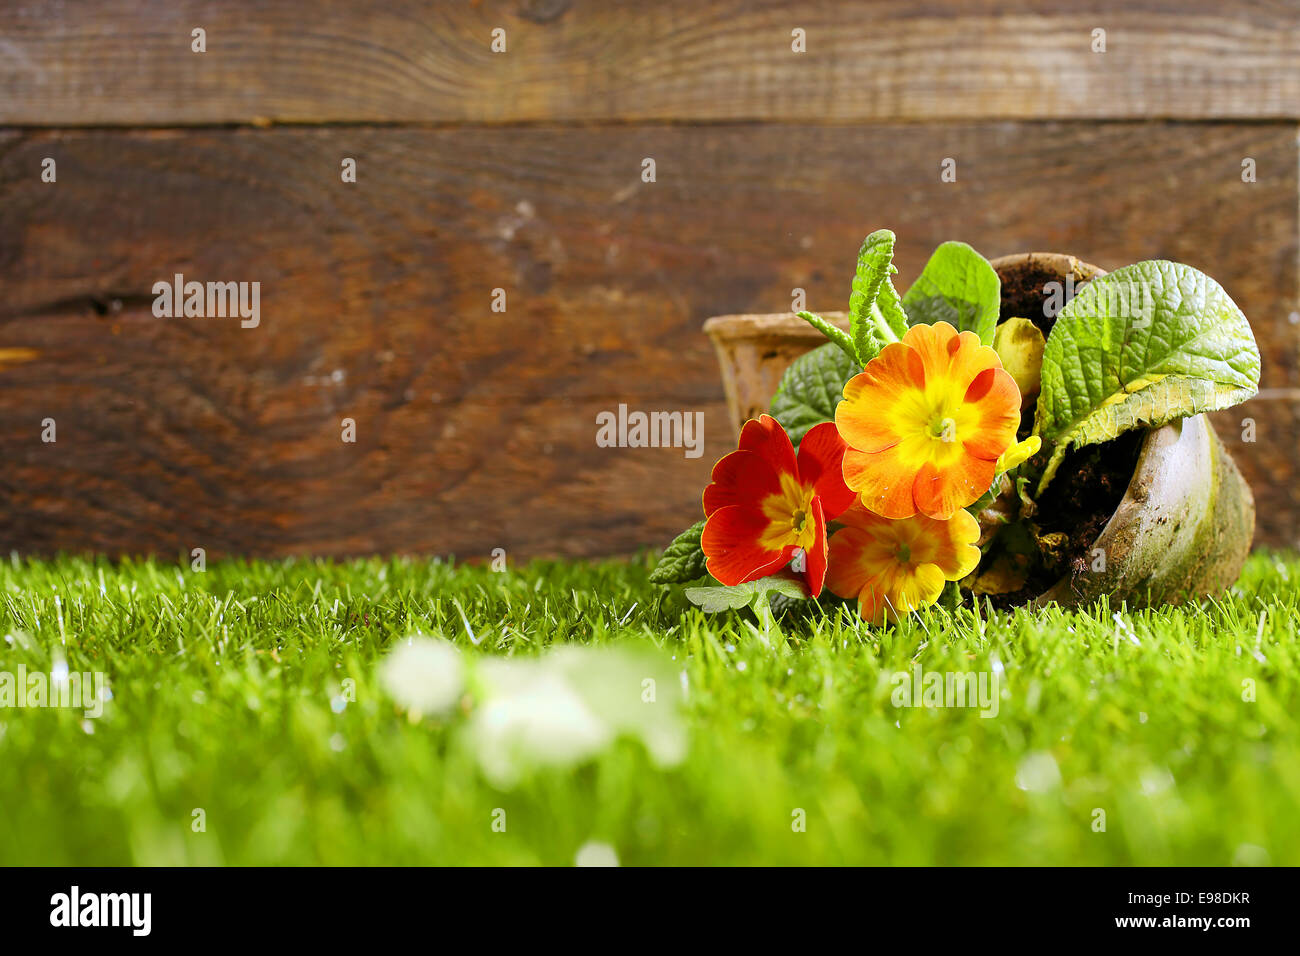 Upended flower pot with colourful orange flowers lying on its side on a neatly trimmed green lawn against a wooden wall Stock Photo